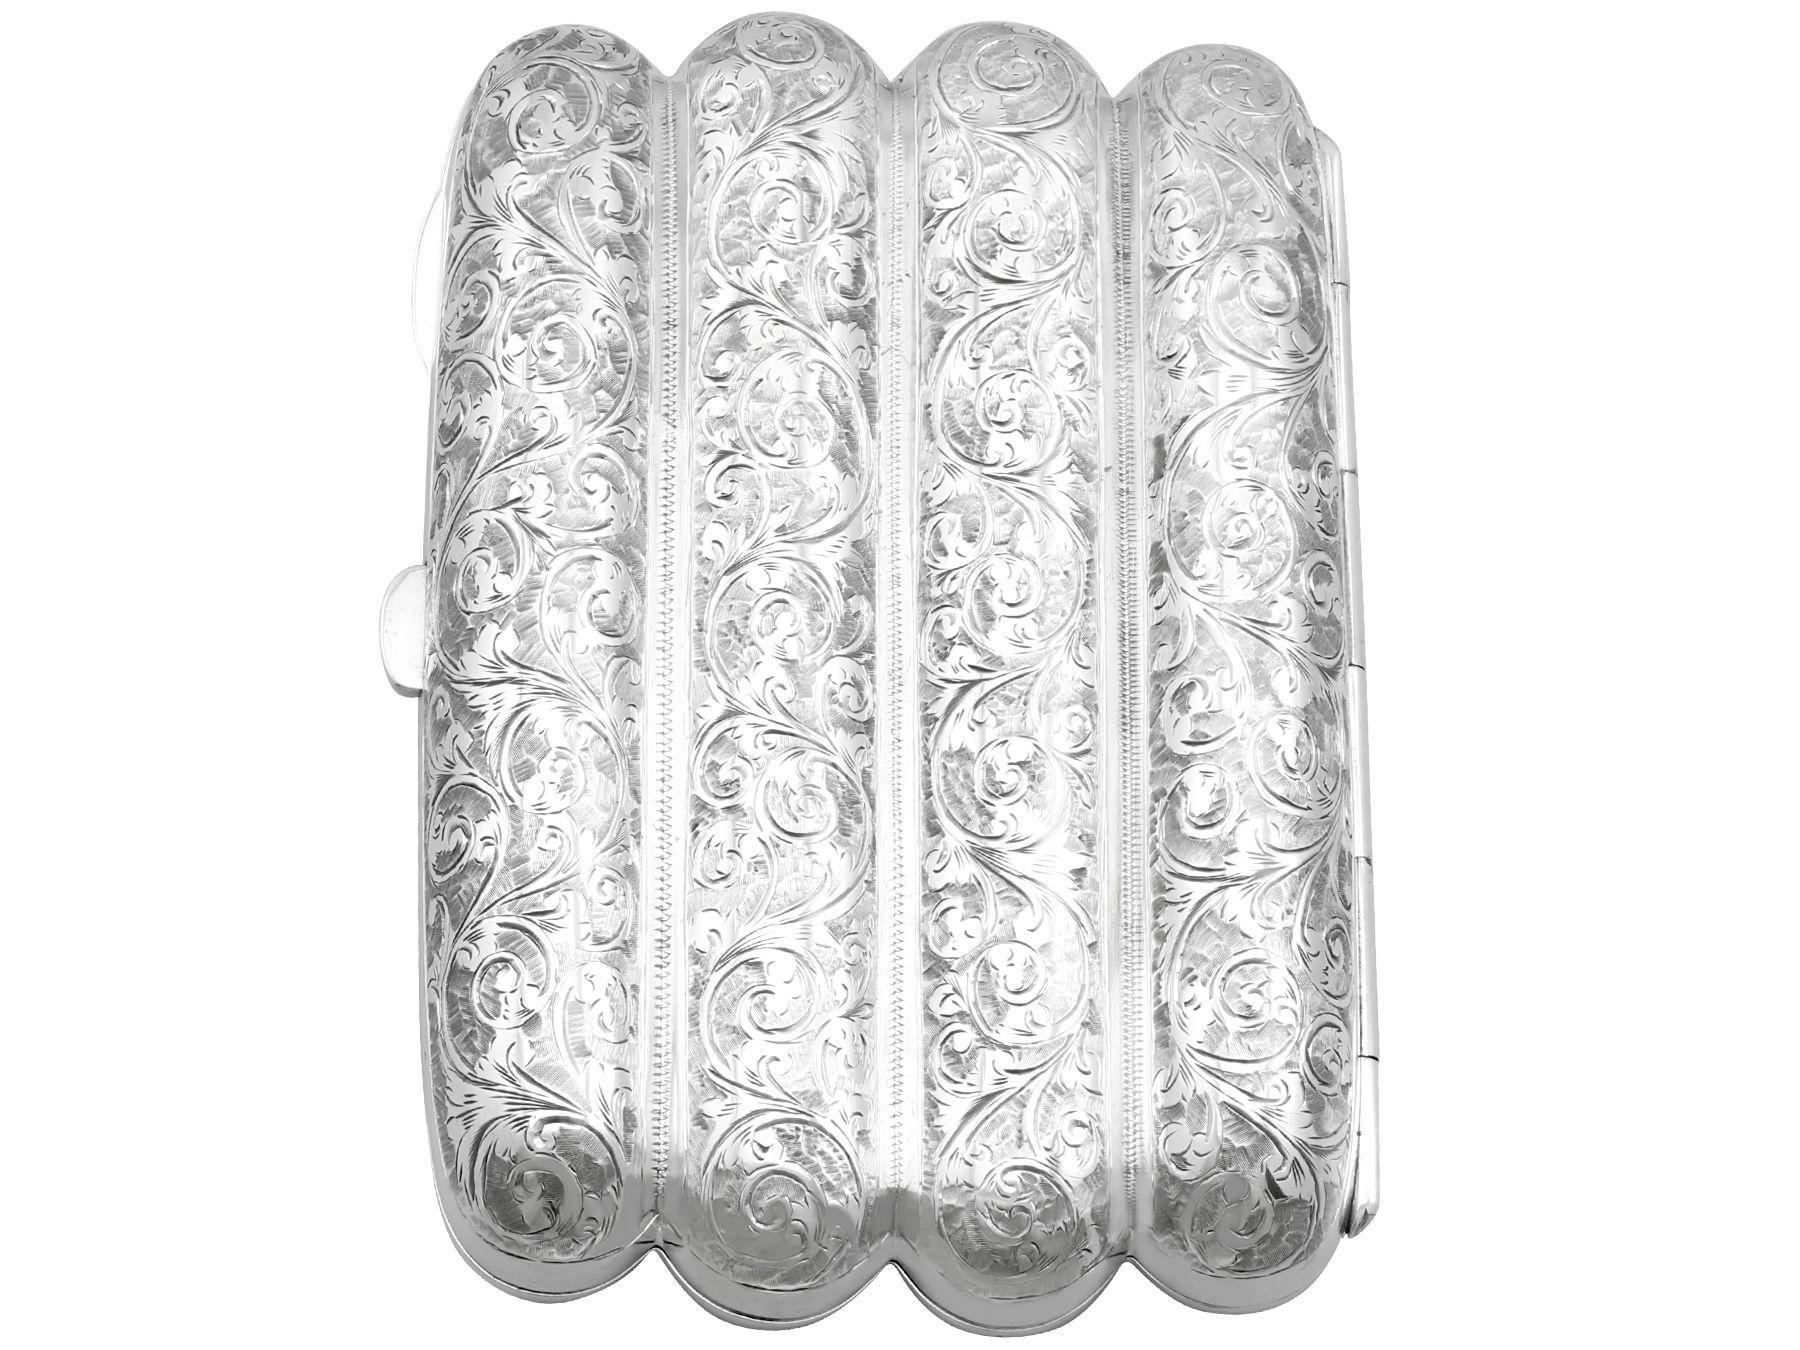 An exceptional, fine and impressive antique Victorian English sterling silver four finger cigar / cheroot case; an addition to the ornamental silverware collection

This exceptional antique sterling silver cigar case has a rounded rectangular shaped